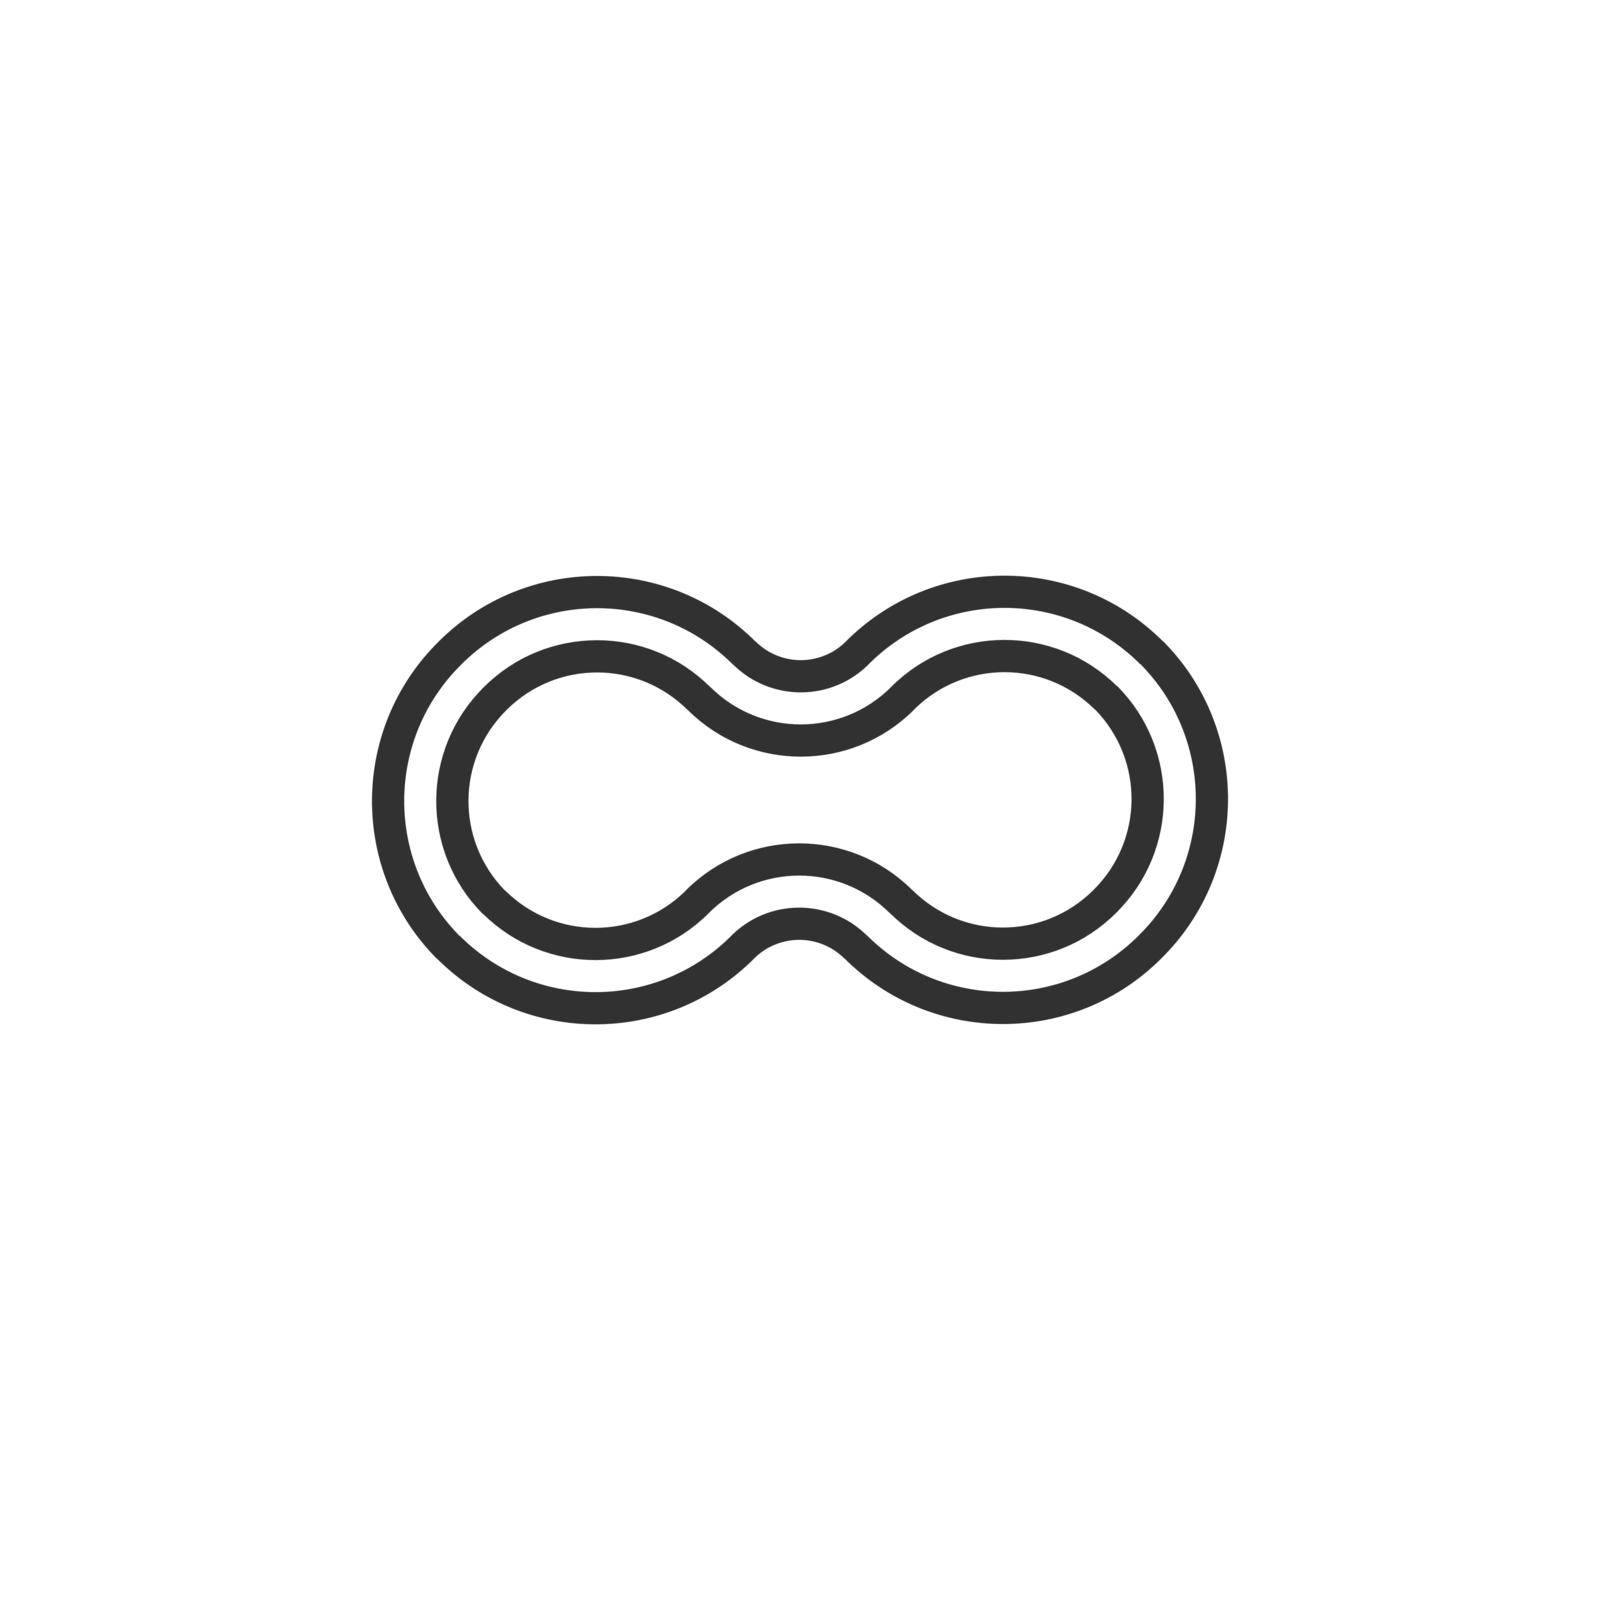 Linear Infinity loop symbol. Circle icon. Flat design. Minimal and simple. Stock Vector illustration isolated